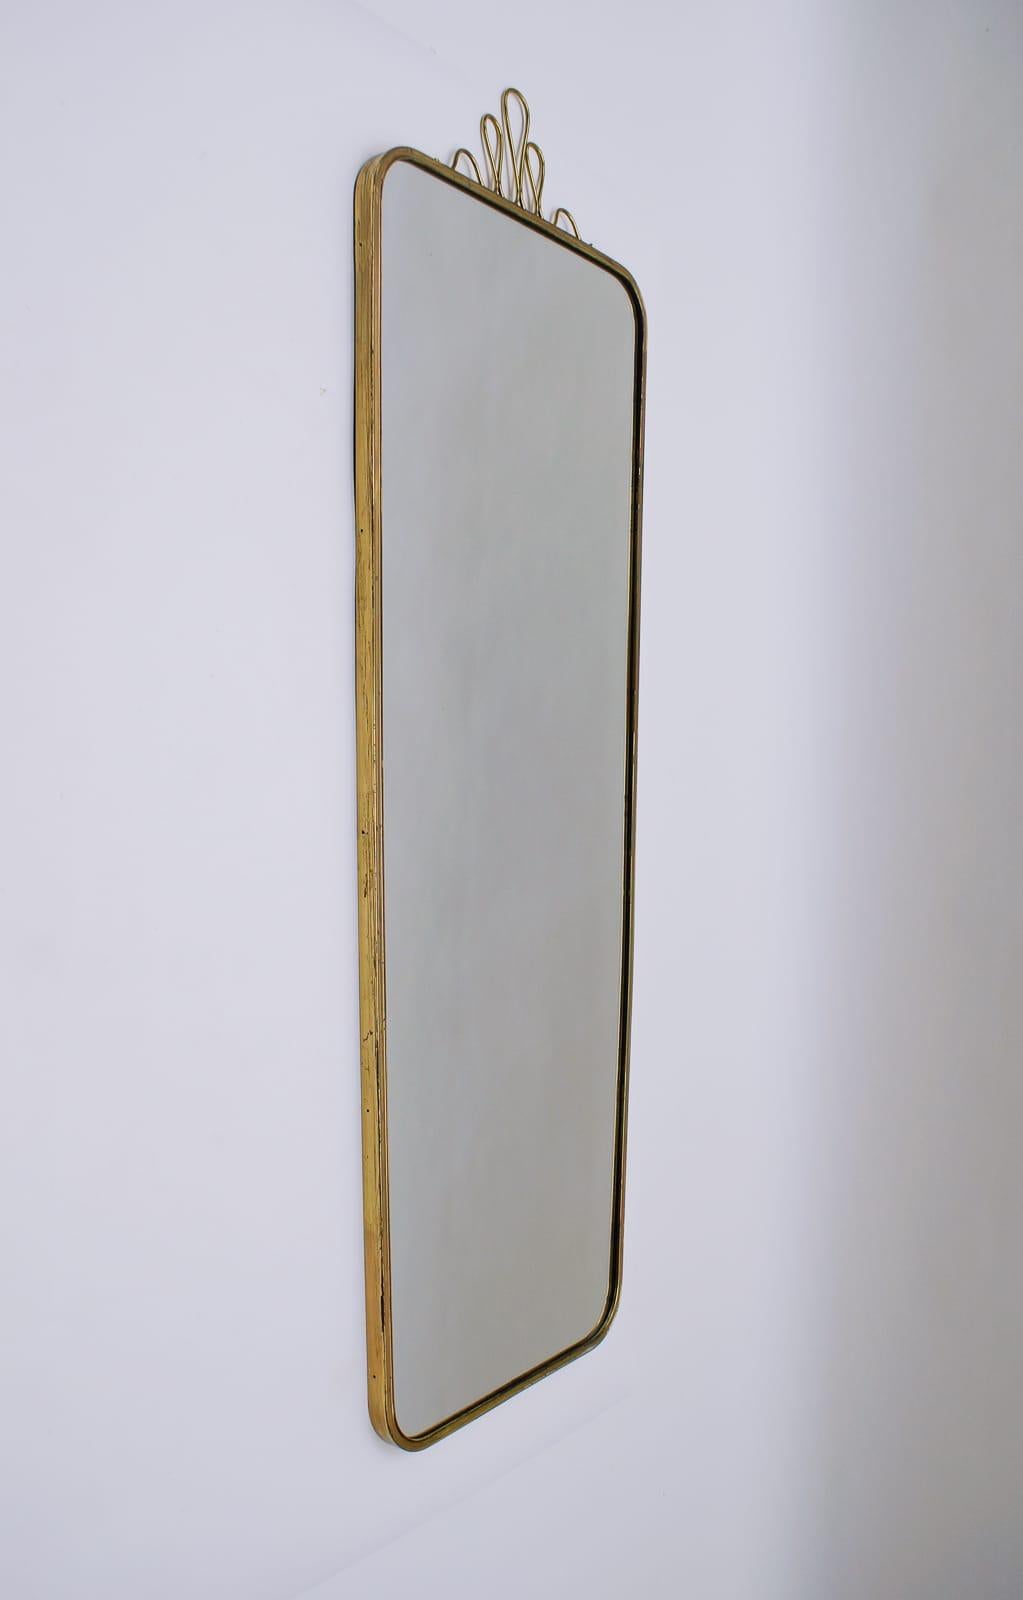 Exceptional rare midcentury brass wall mirror. Made in Italy.
Great 1950s Minimalist design. Very high quality and elegantly production.
Above is a brass crown.
Heavy and very solidly built.
Total height with crown 117cm, mirror height